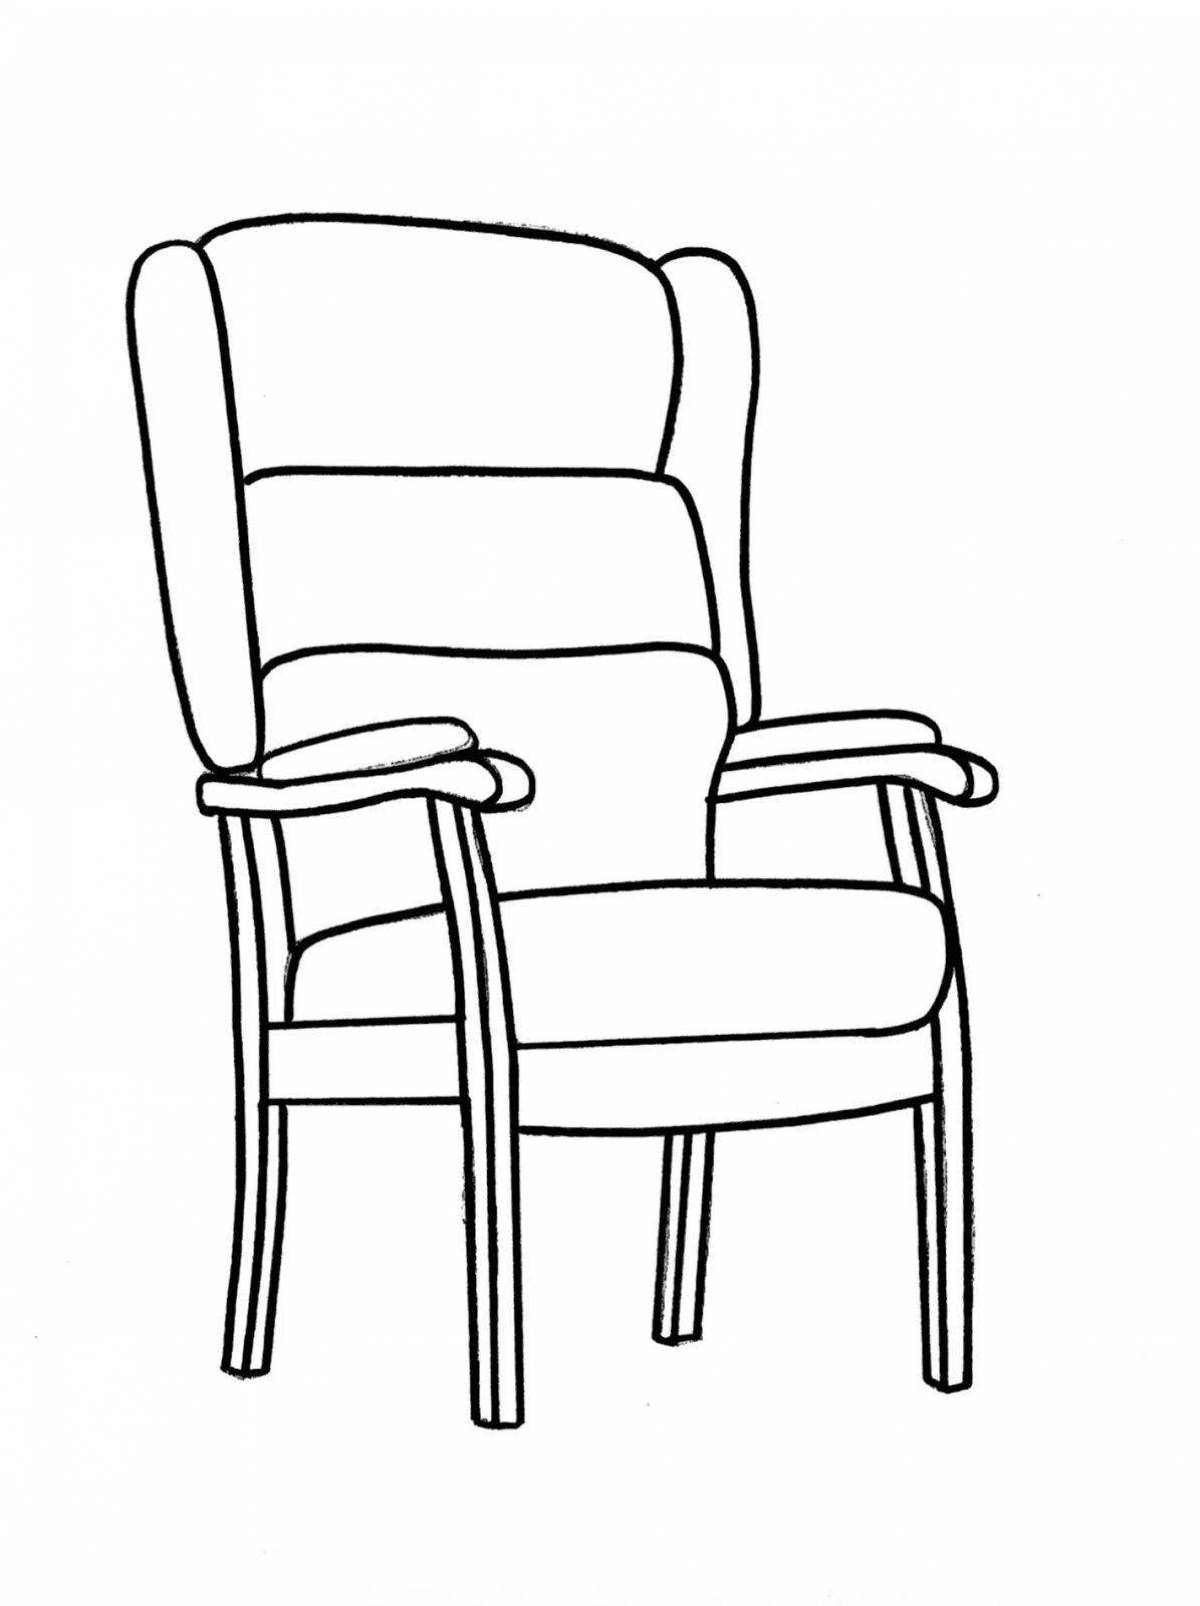 Playful coloring page of armchair for 4-5 year olds